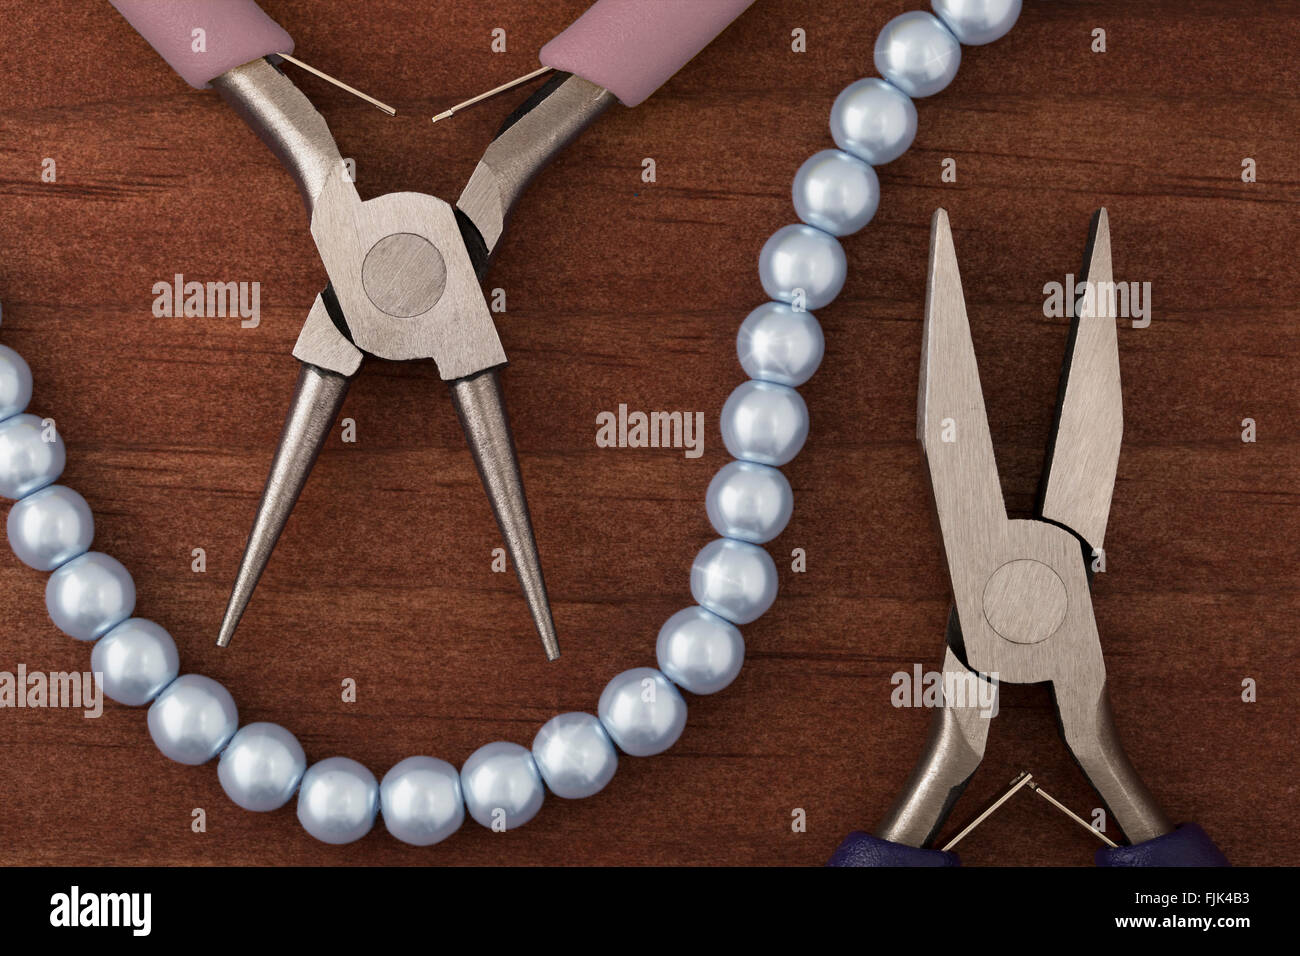 Two types of jewelry making pliers and a string of blue pearls for jewelry making. Stock Photo